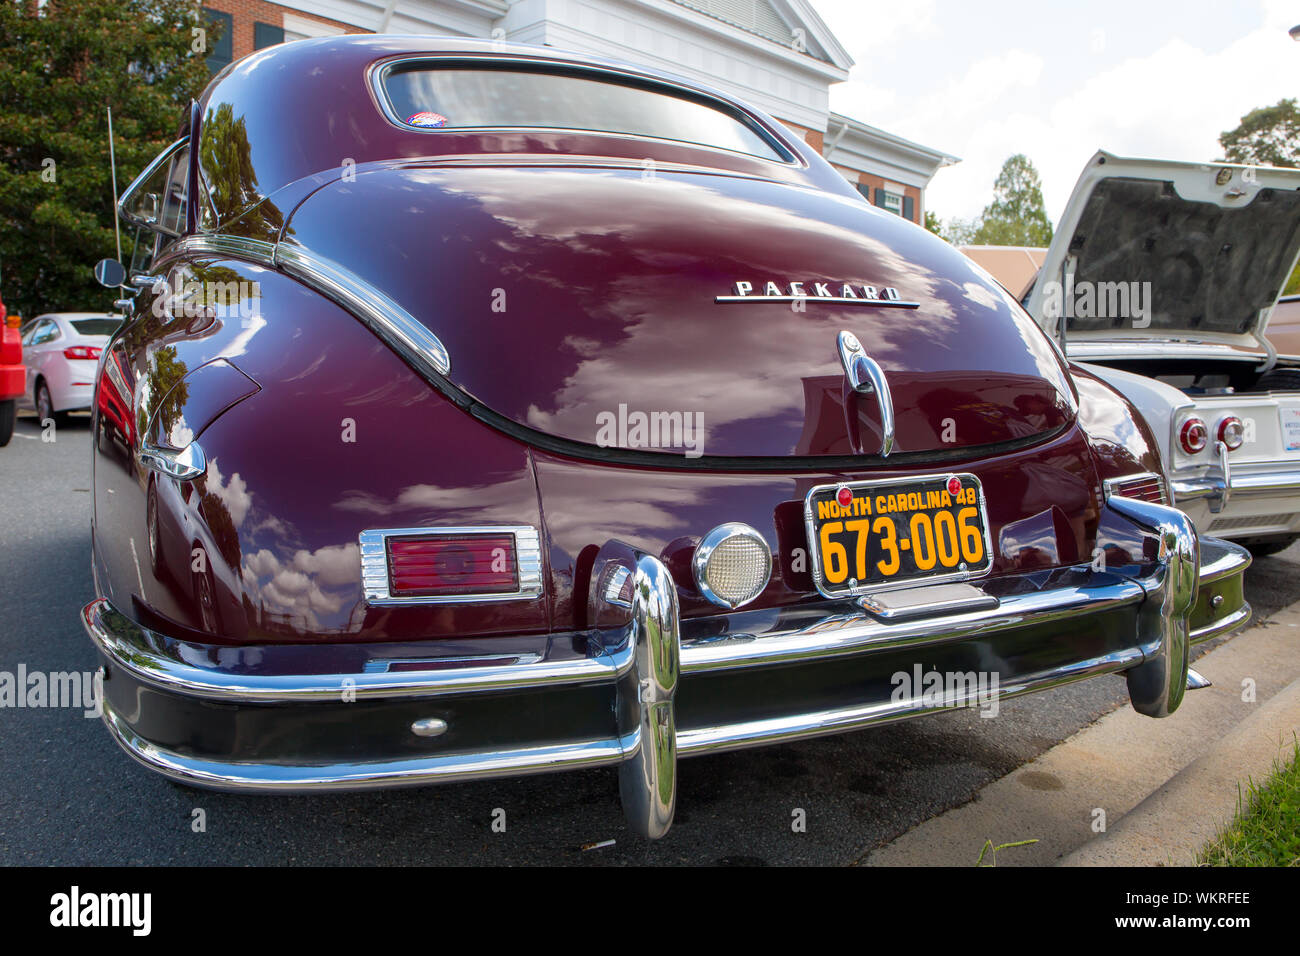 Closeup of a classic 1948 Packard automobile on display at a classic car show in Matthews, North Carolina. Stock Photo